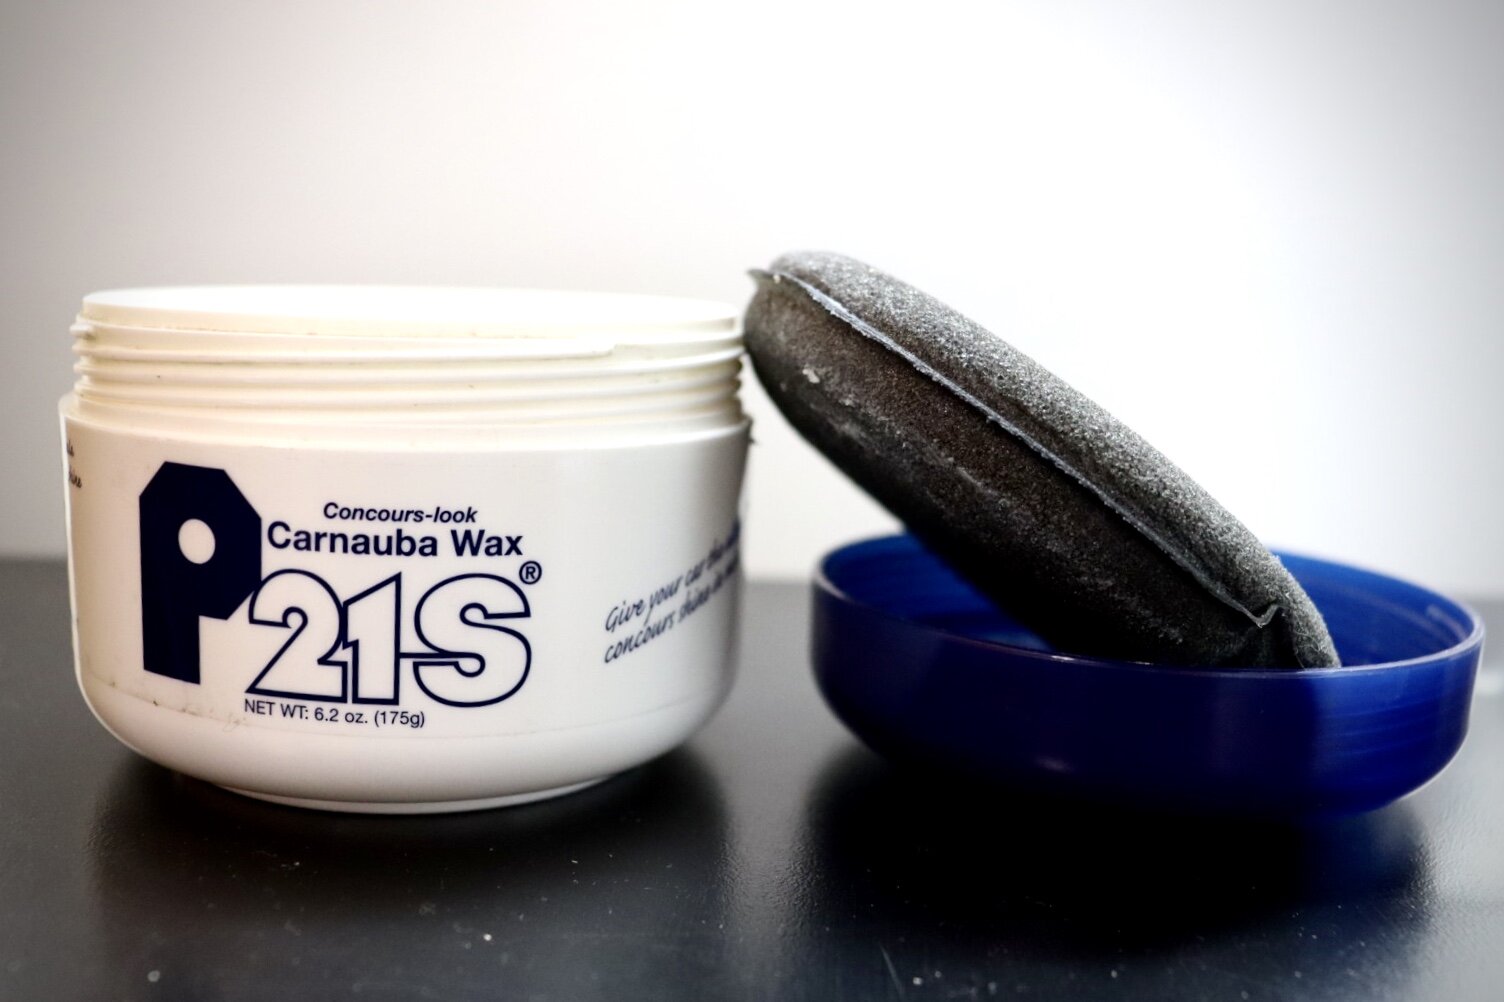 P21S Concours-look Carnauba Wax - P21S Auto Care Products